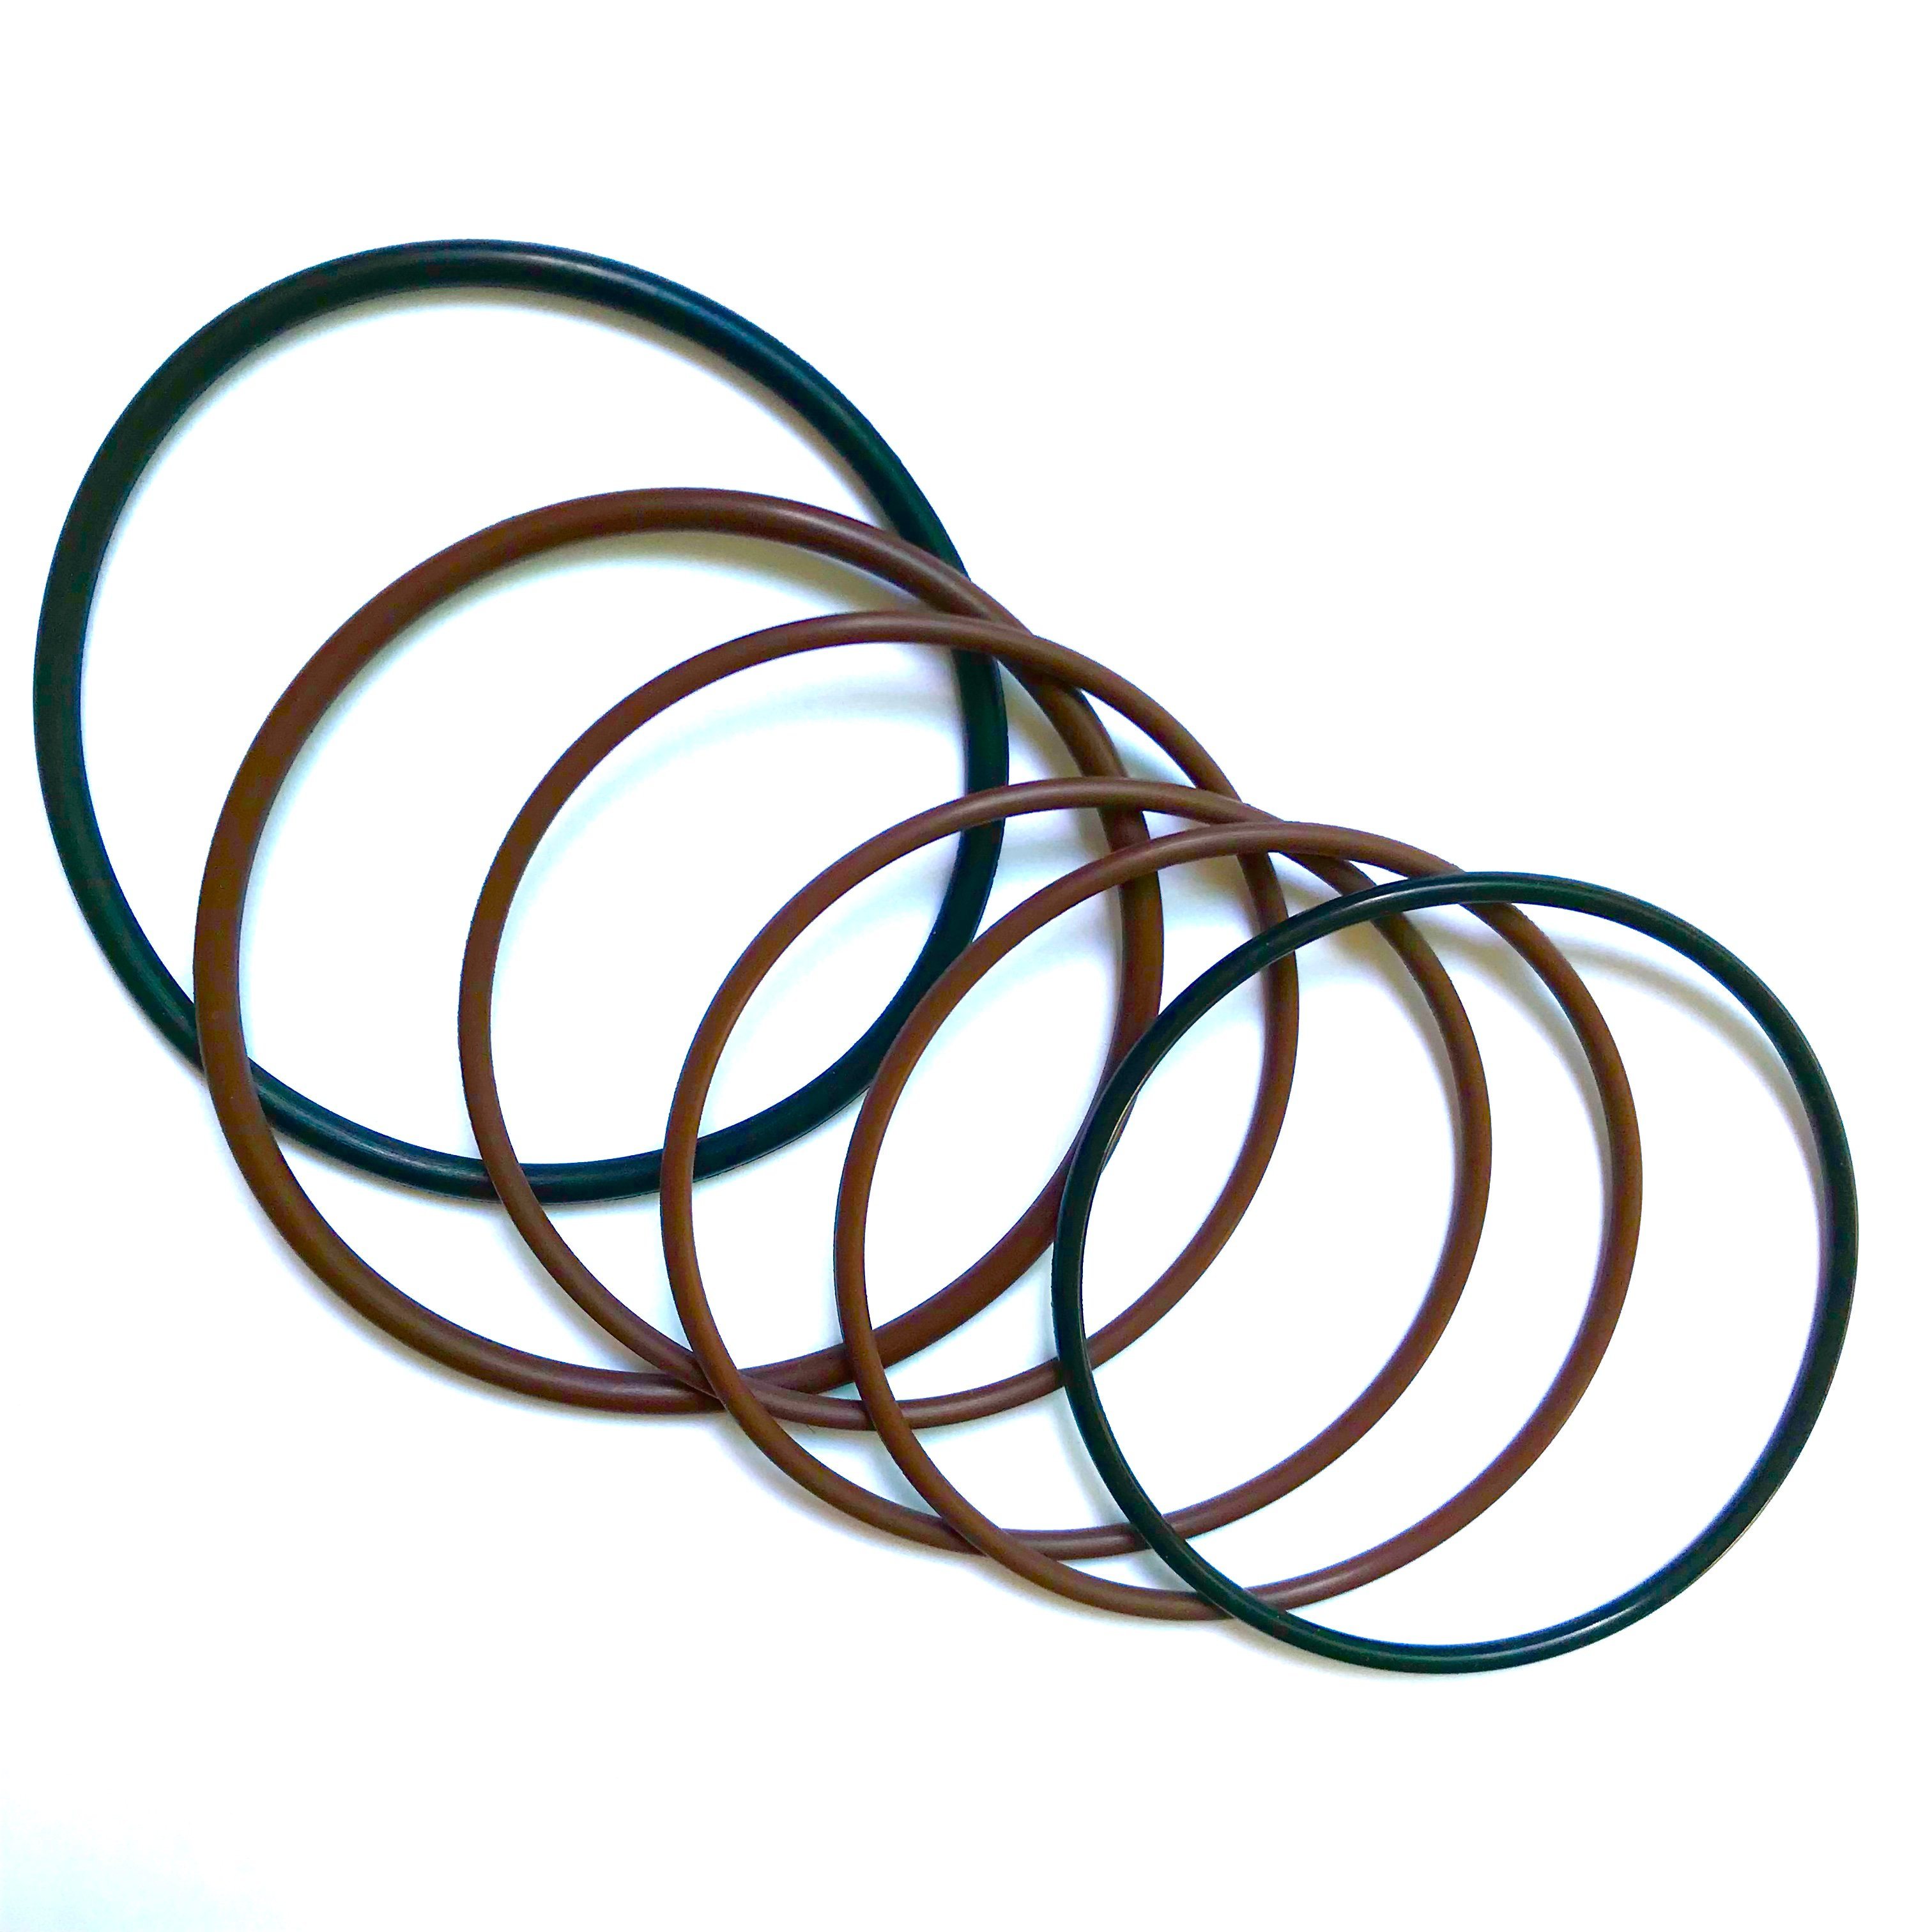 ODM Molded Rubber O-Ring